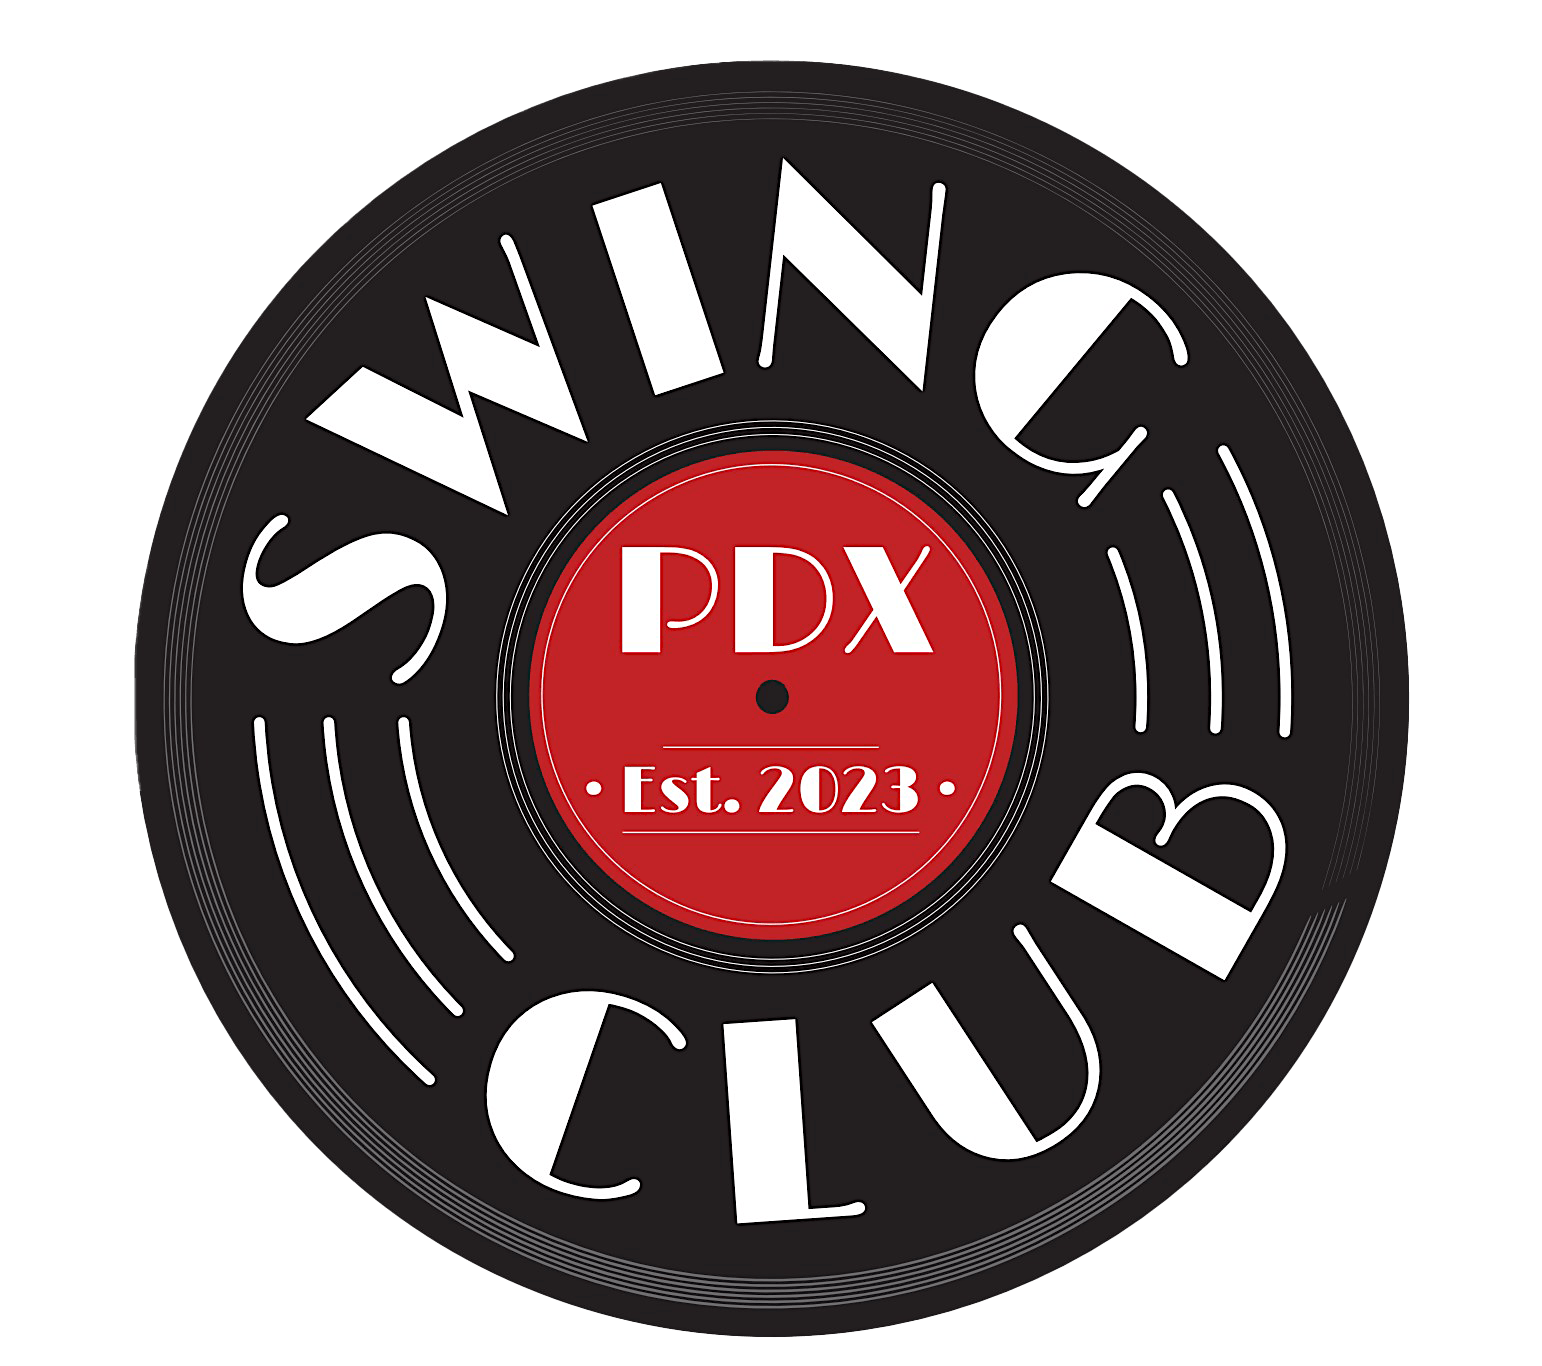 The Swing Club PDX